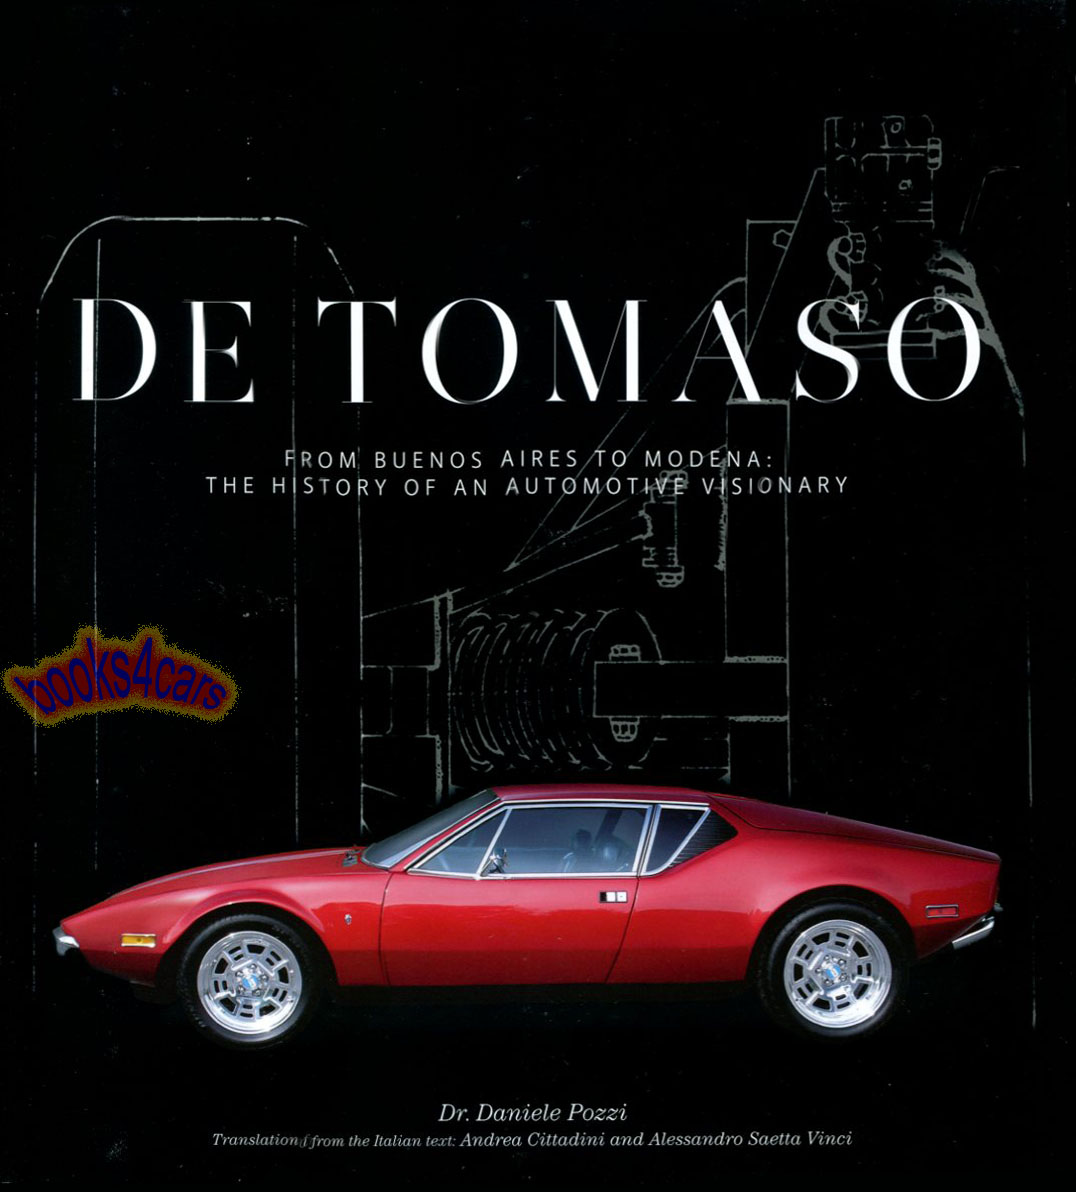 DeTomaso from Buenos Airea to Modena by Pozzi 240 pgs hardcover